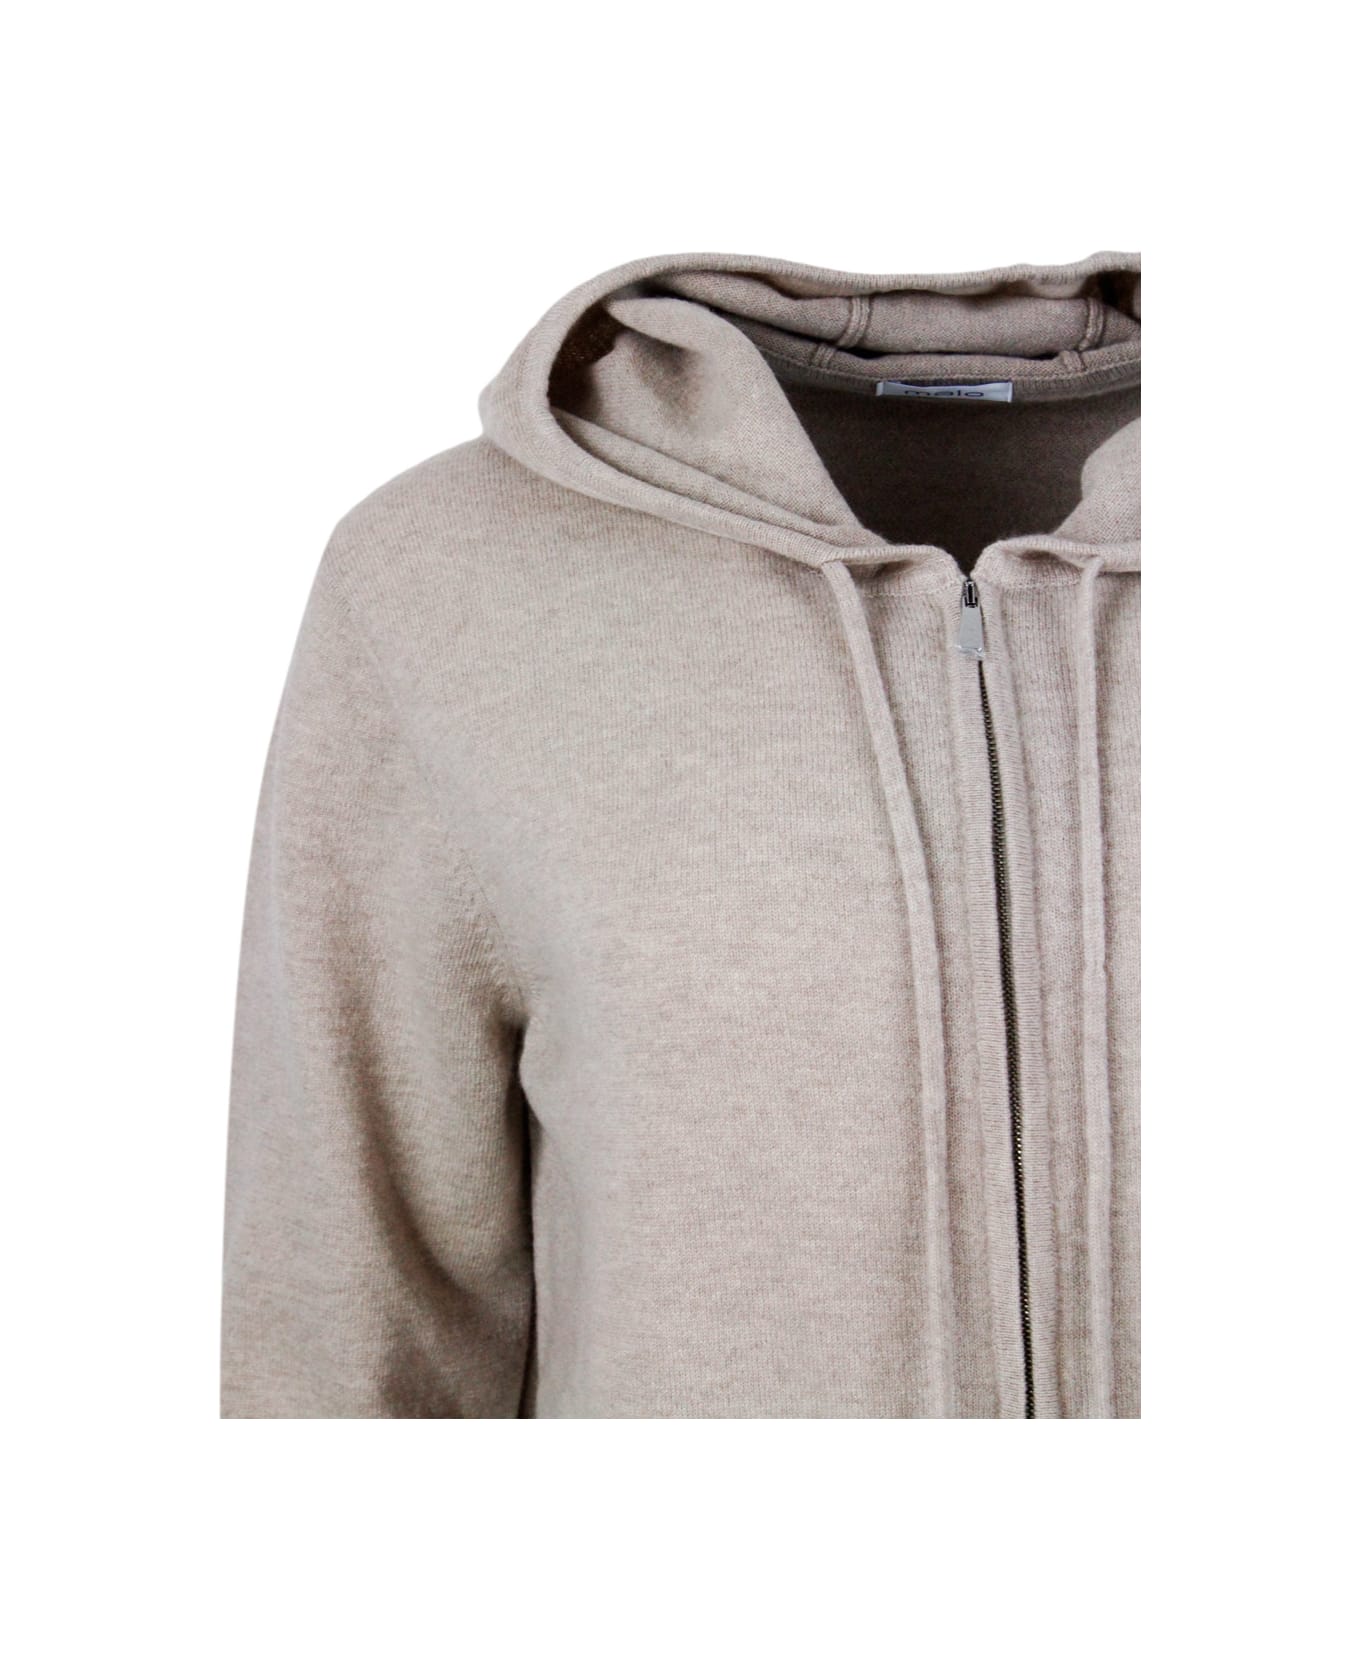 Malo Sweatshirt Style Sweater In Pure And Soft Cashmere With Hood And Zip Closure - Beige ニットウェア